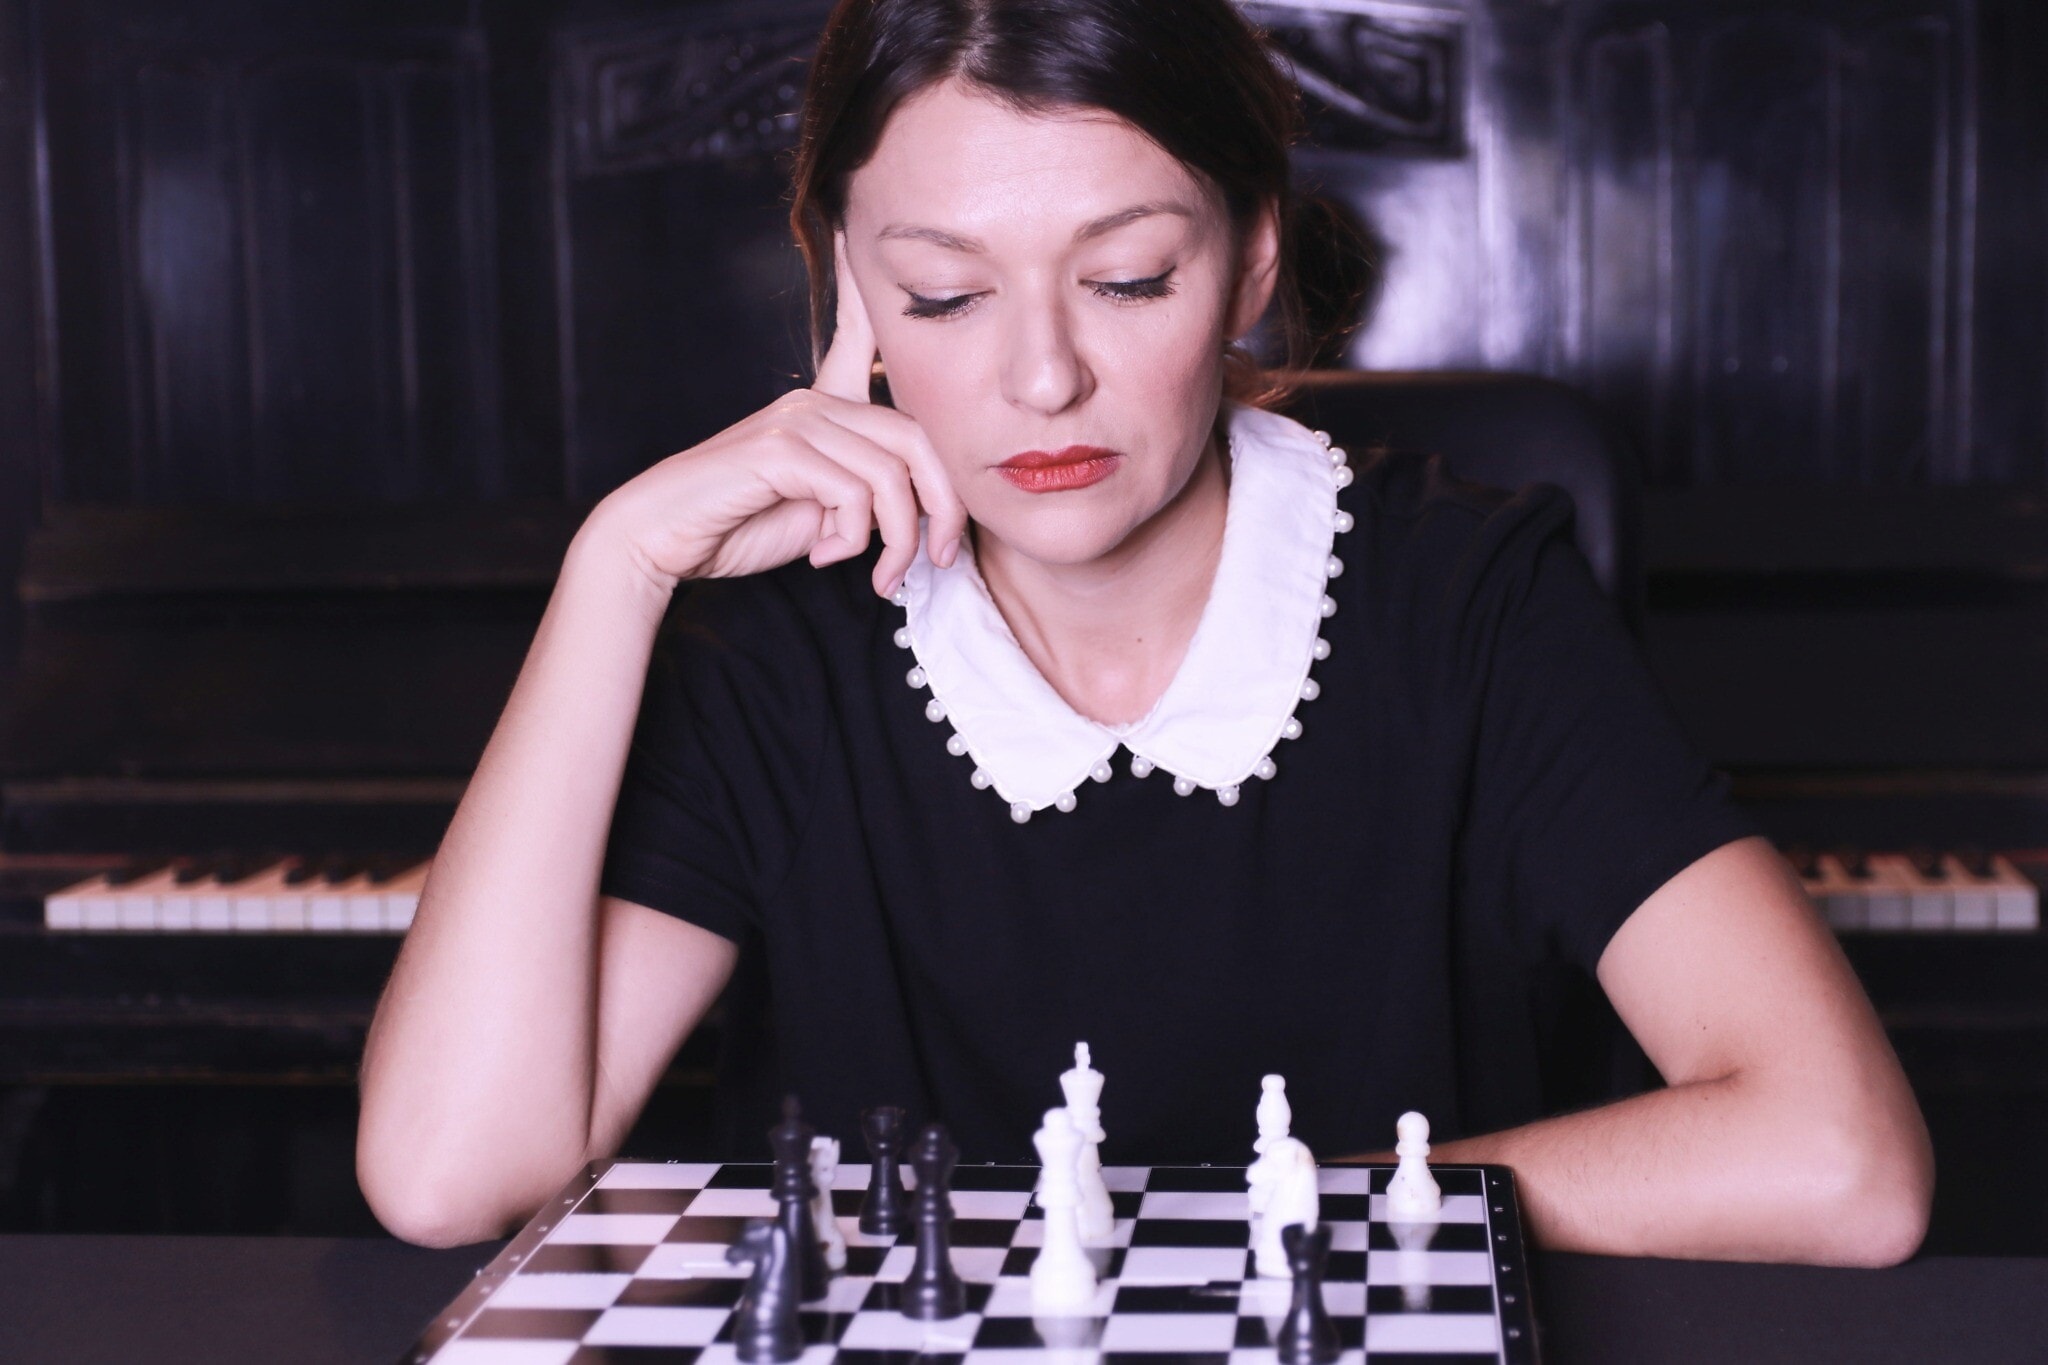 Who was the chess player Elizabeth Harmon? - Quora